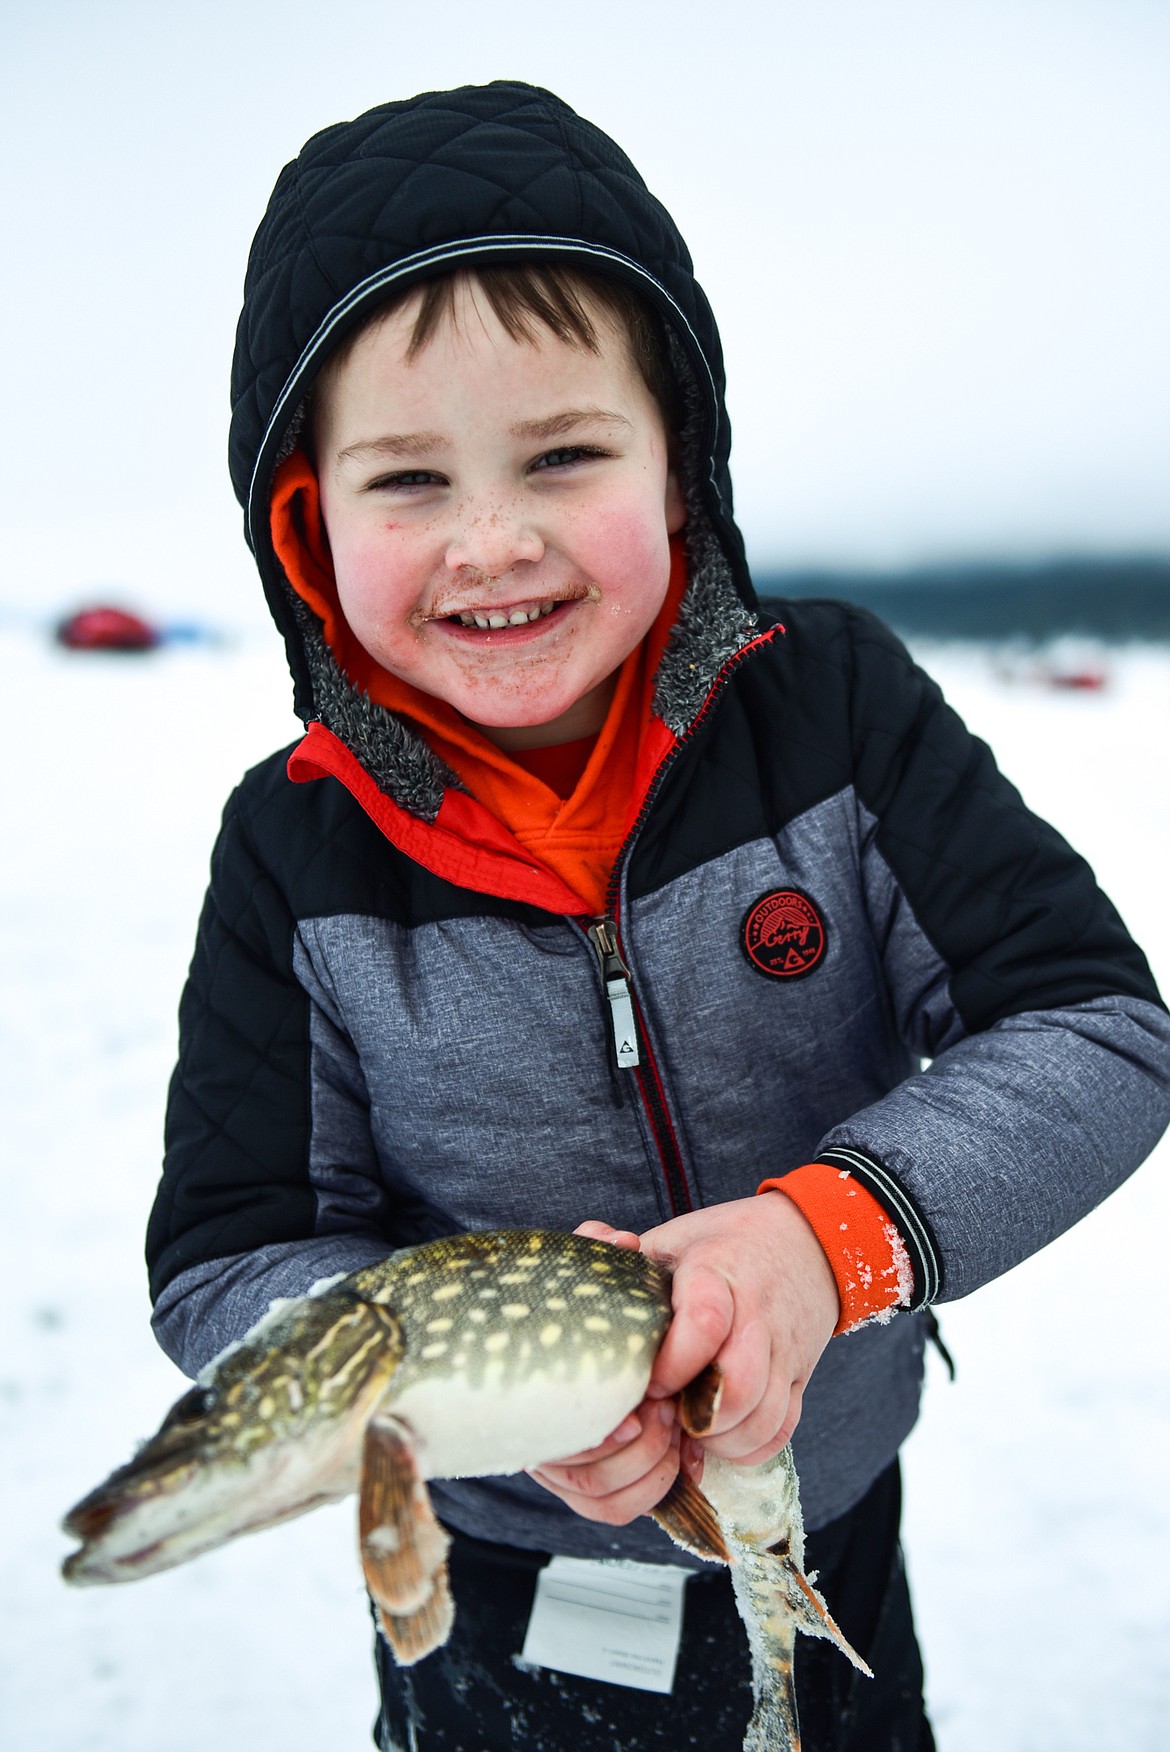 Colton Reynolds holds a pike he caught at the Sunriser Lions Family Ice Fishing Derby at Smith Lake on Saturday, Jan. 7. (Casey Kreider/Daily Inter Lake)